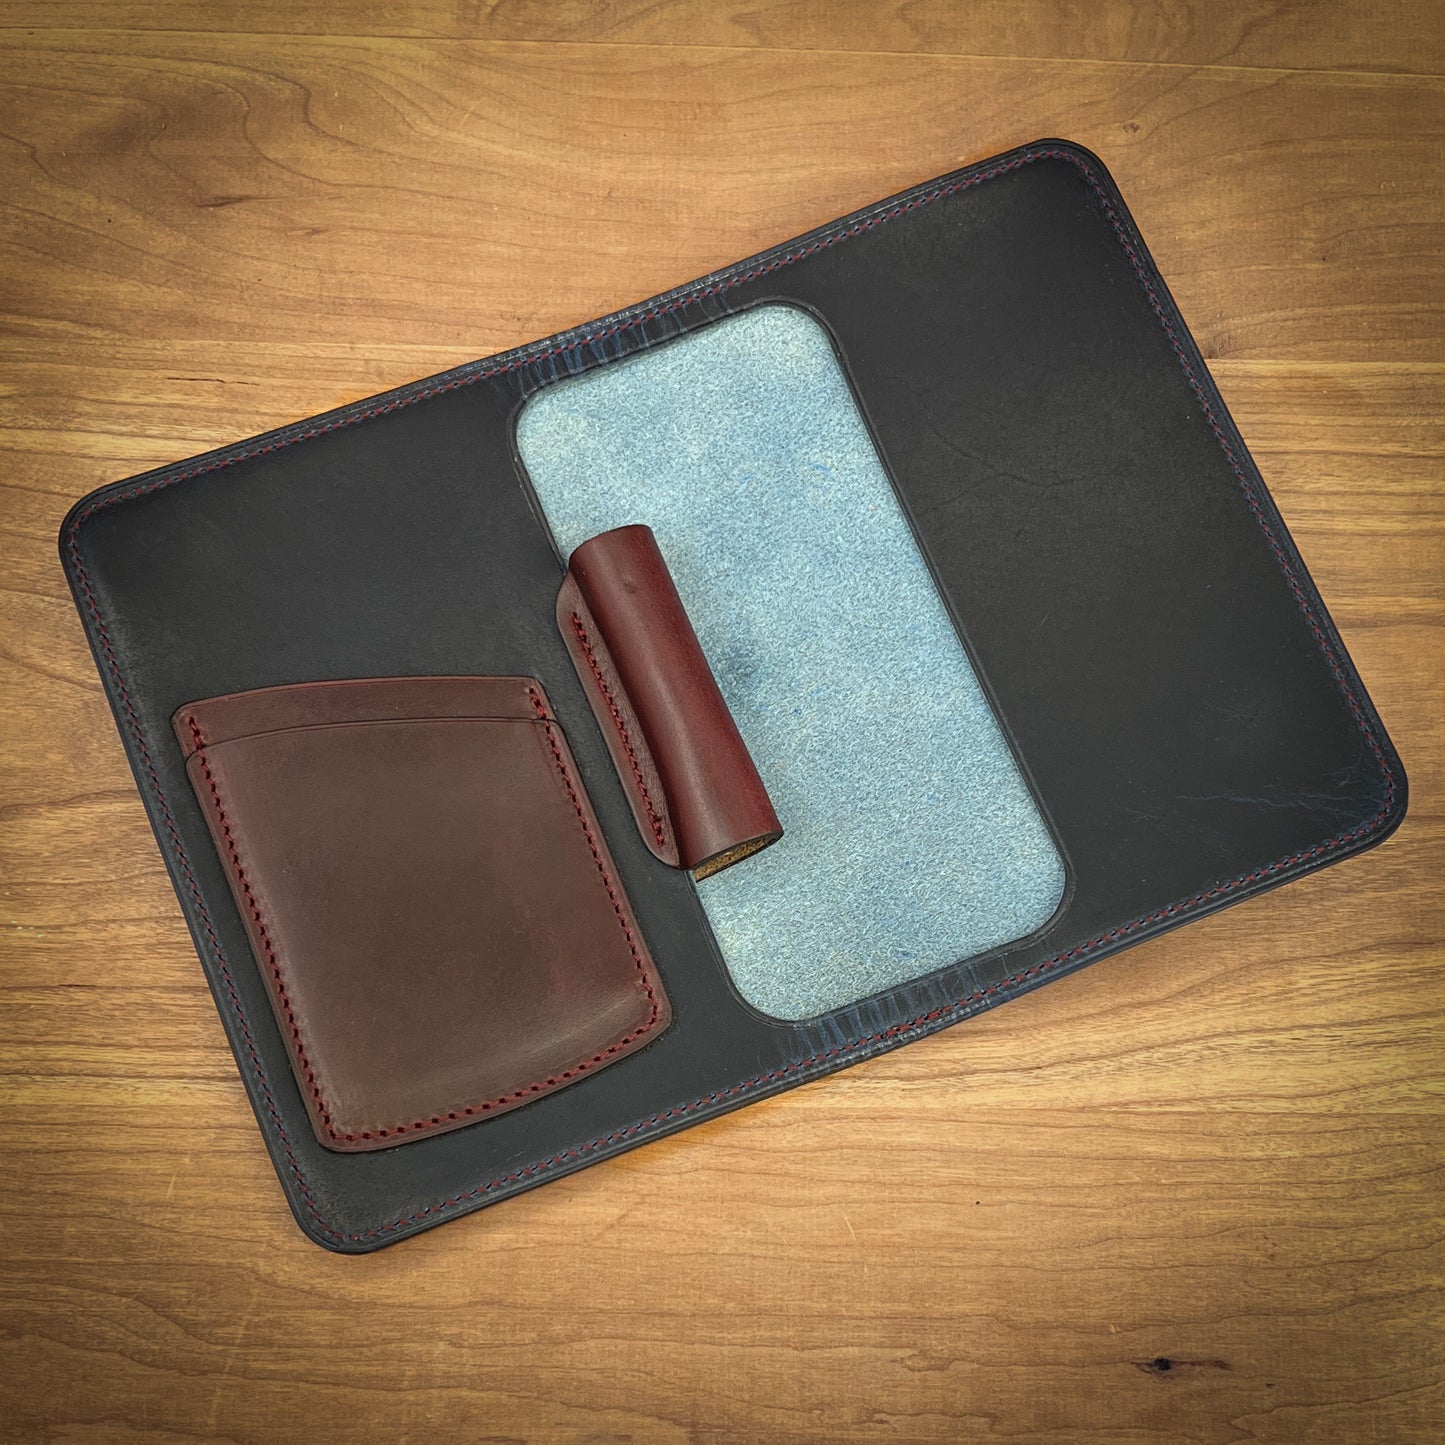 Pocket Size Notebook Cover in Cobalt Blue and #8 Horween Leather | Ready to Ship